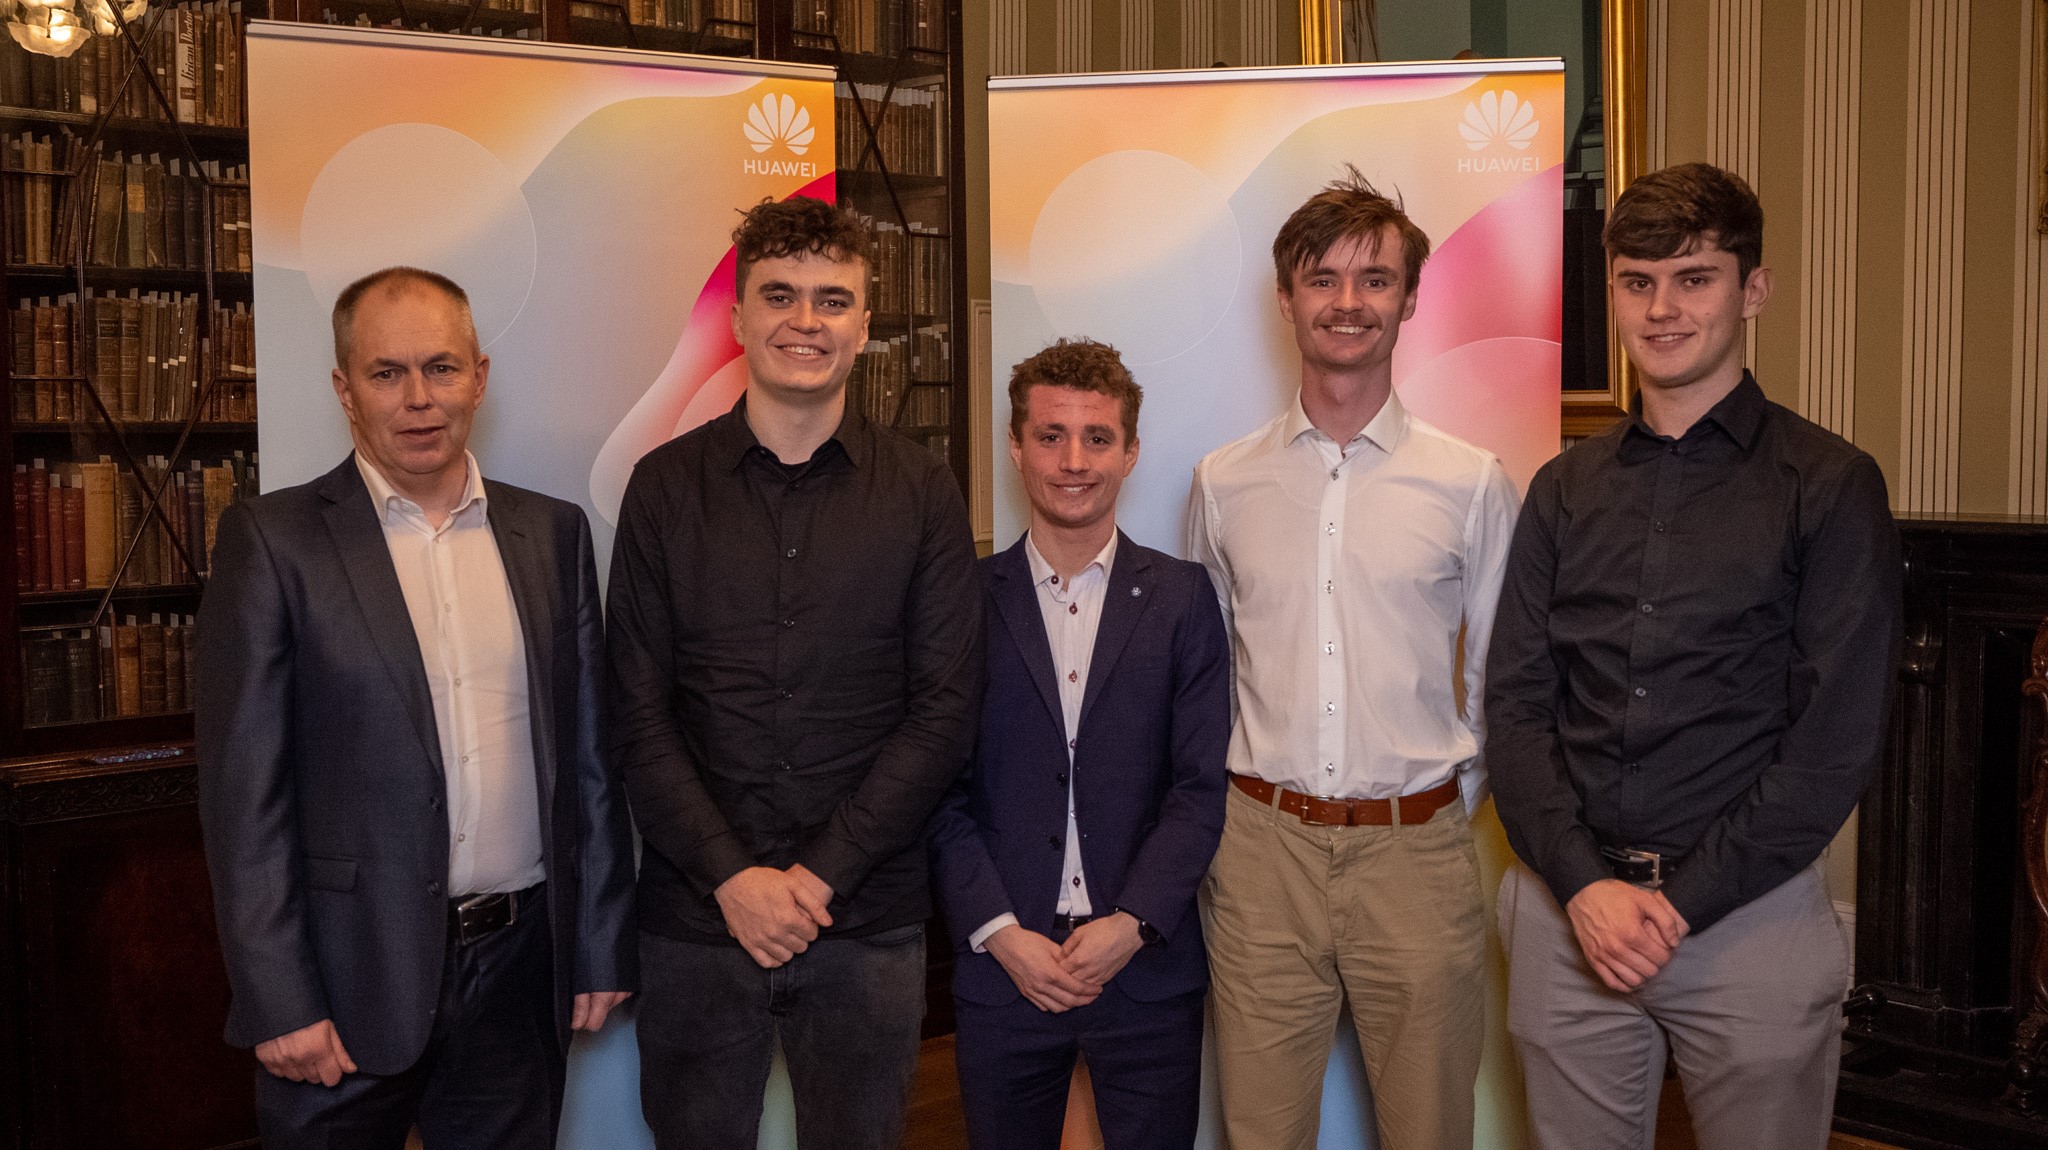 Engineering students awarded €5,000 Bursaries each Through Huawei’s 2021 ‘Seeds for the Future’ ICT talent nurturing initiative